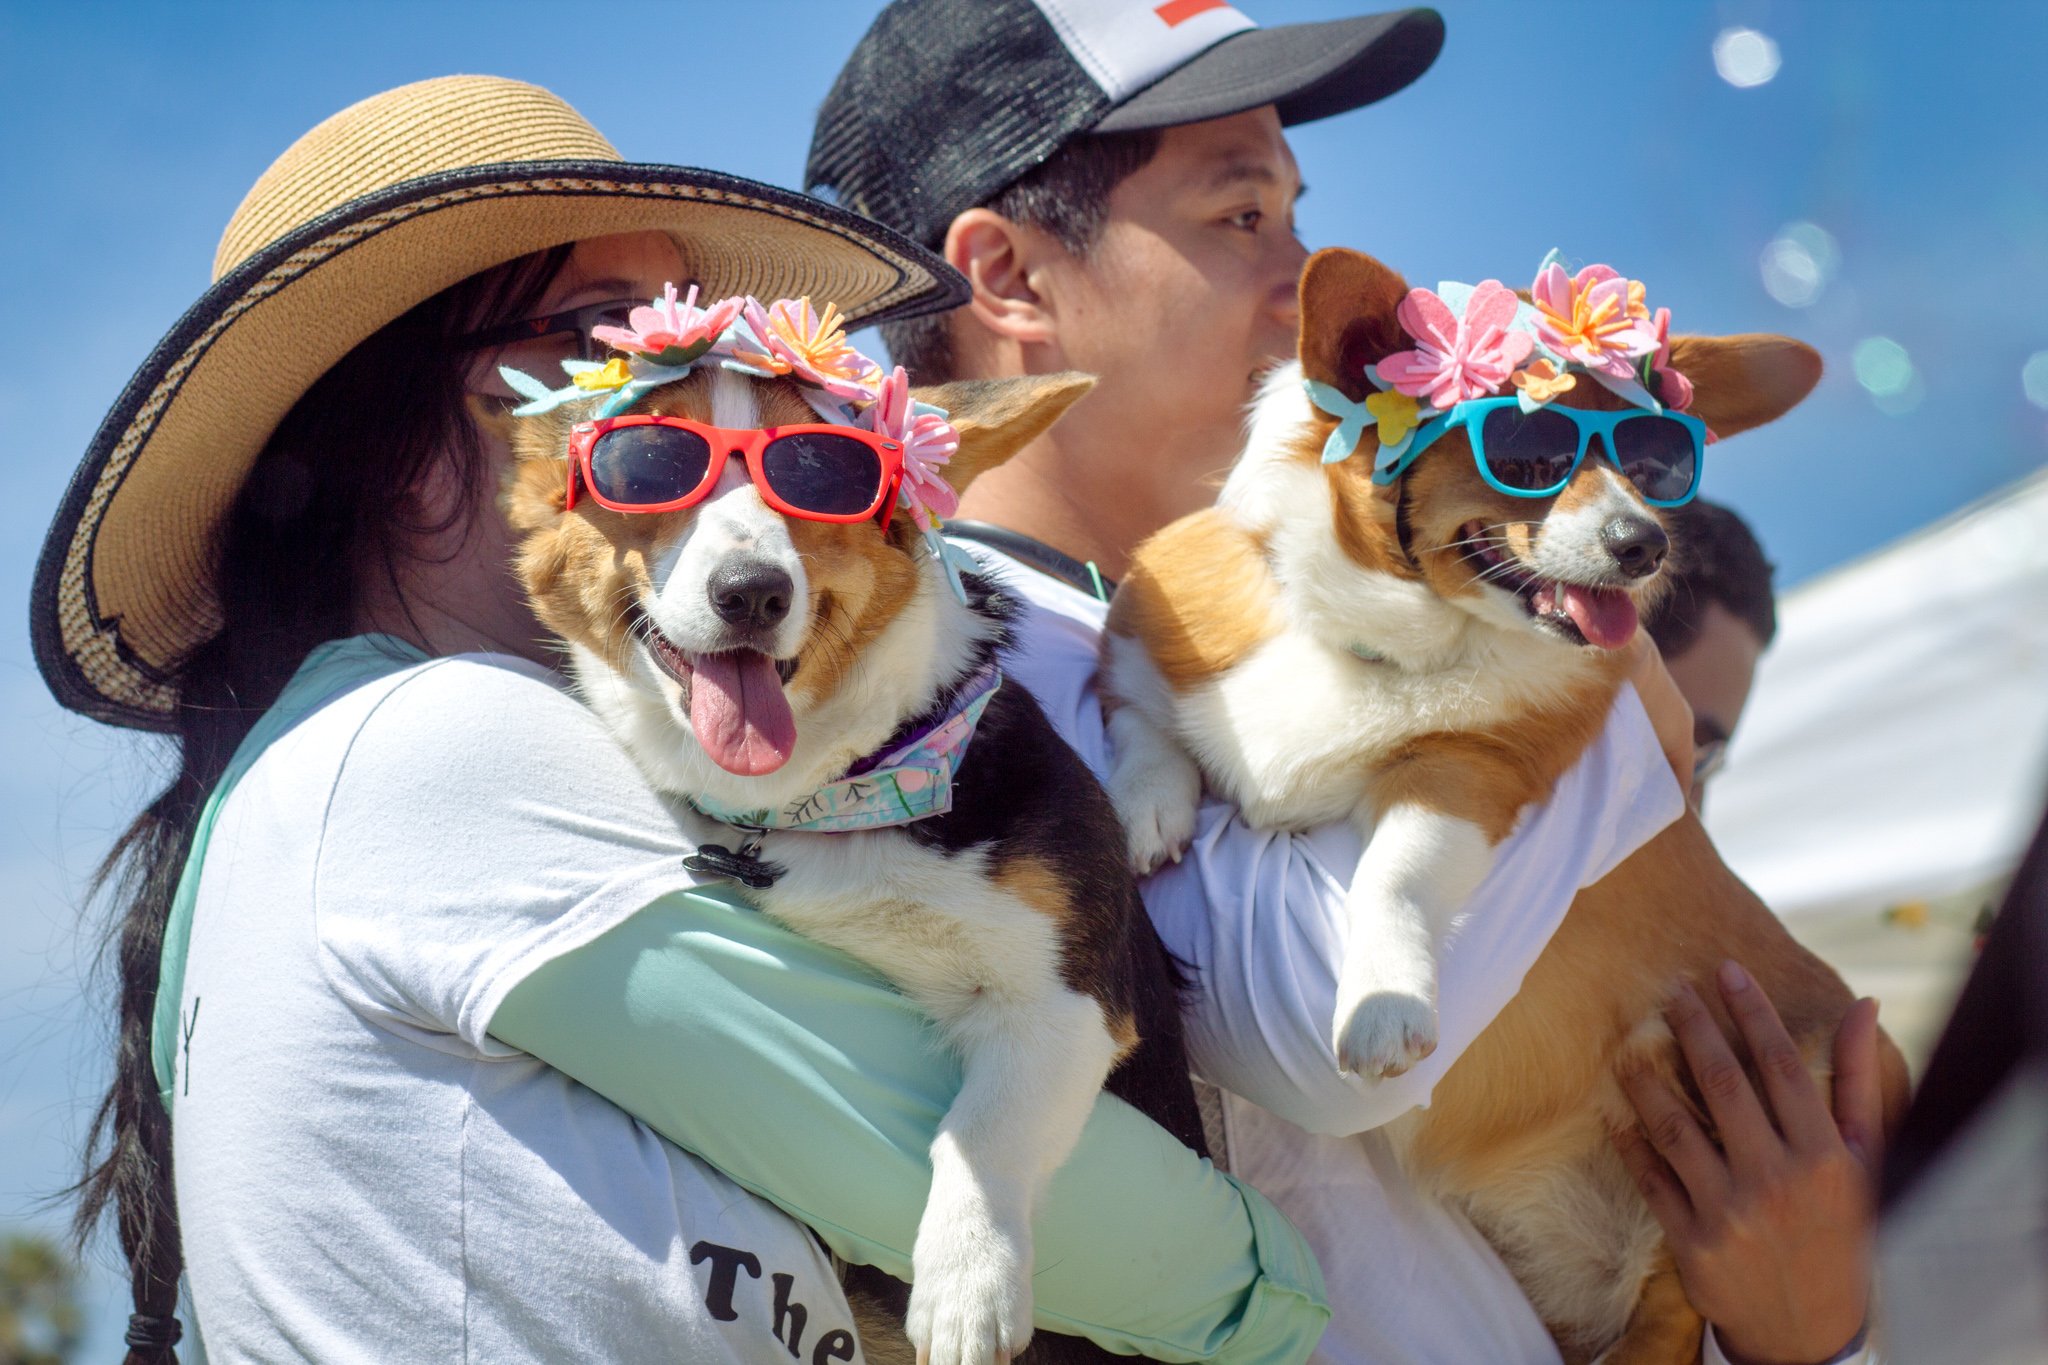 Orange County Pet and Dog Photography - by Steamer Lee - Corgi Beach Day Spring 2019 - Southern Caliornia 48.JPG